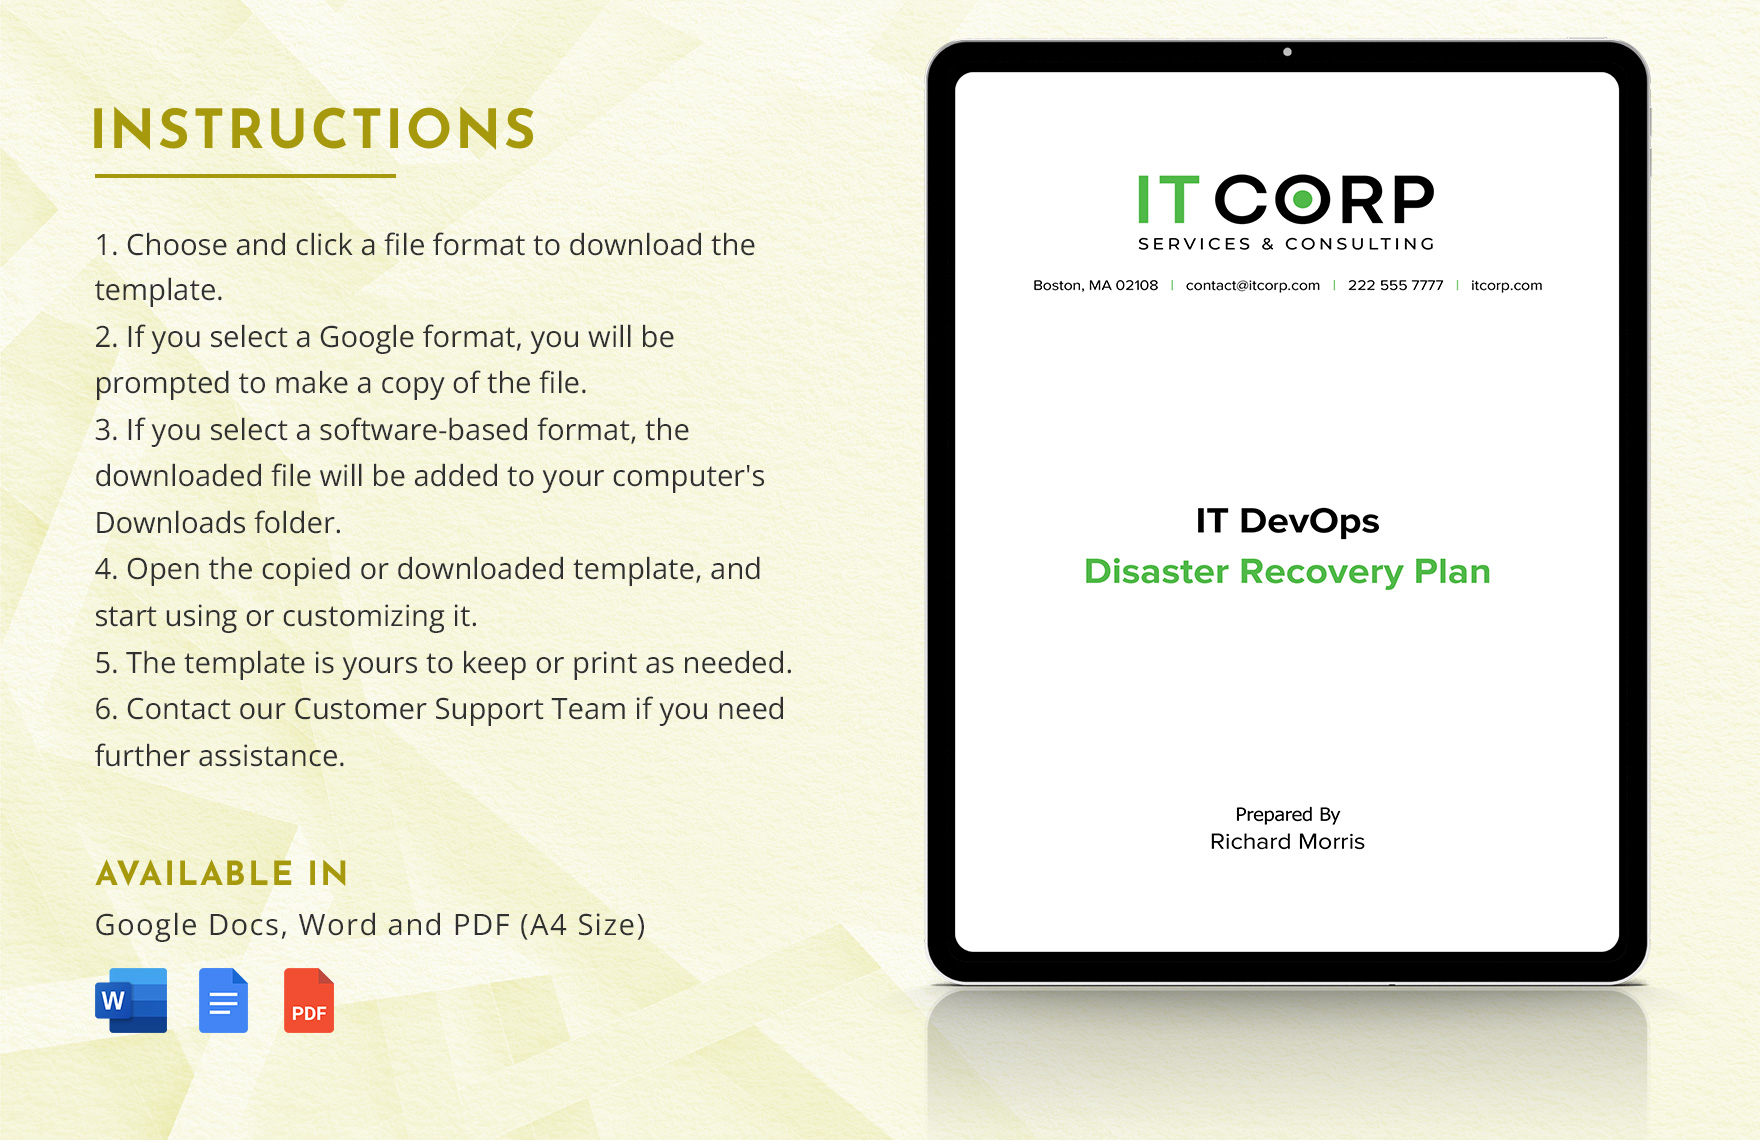 IT DevOps Disaster Recovery Plan Template